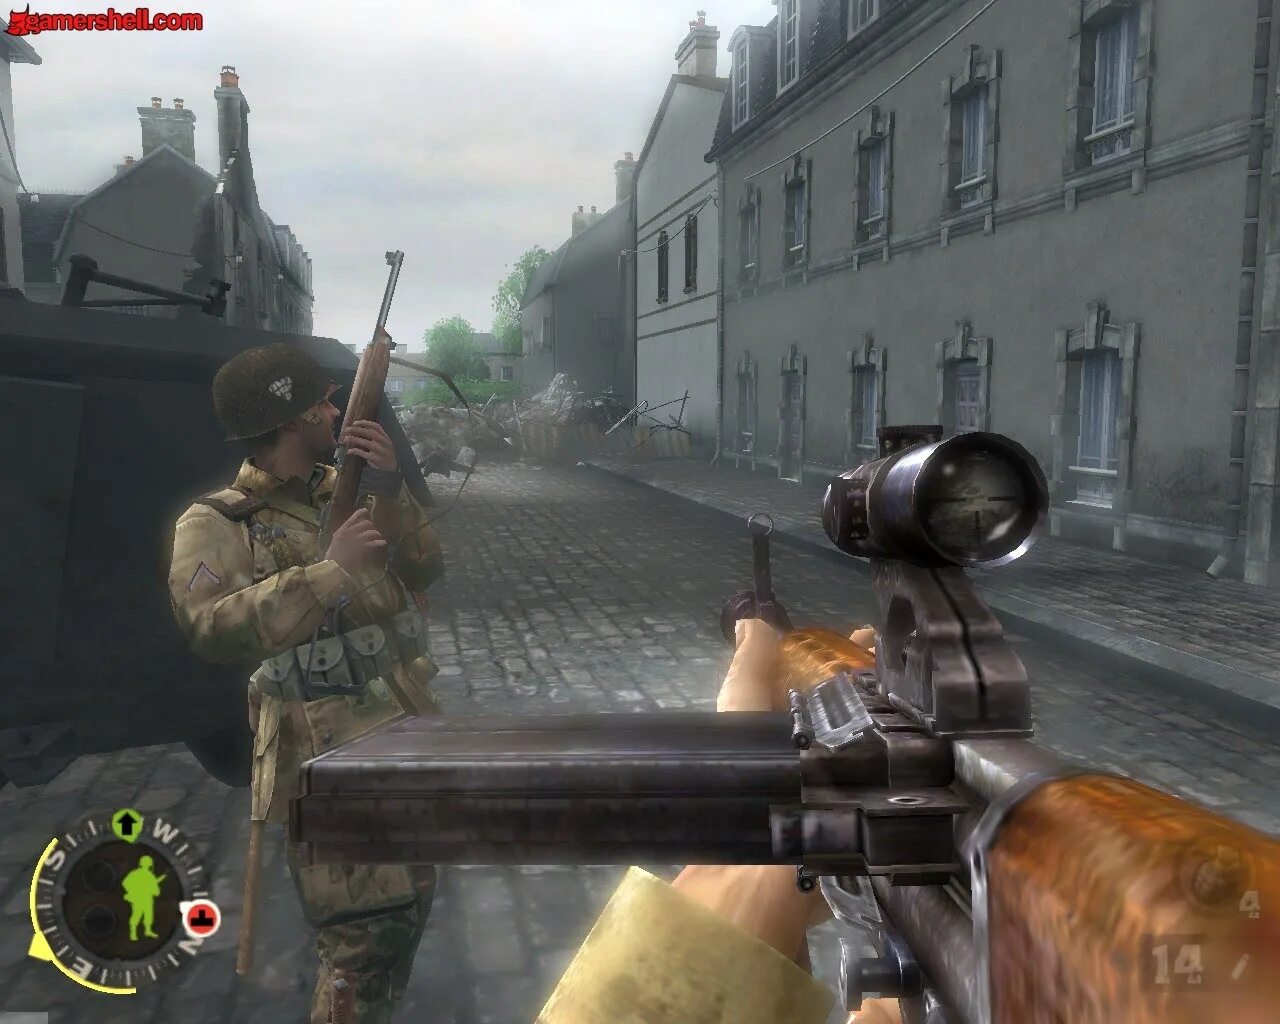 Игра brothers in Arms earned in Blood. Игра brothers in Arms 1. Brothers in Arms: earned in Blood (2005). Brothers in Arms 2005. Игра оружие времени